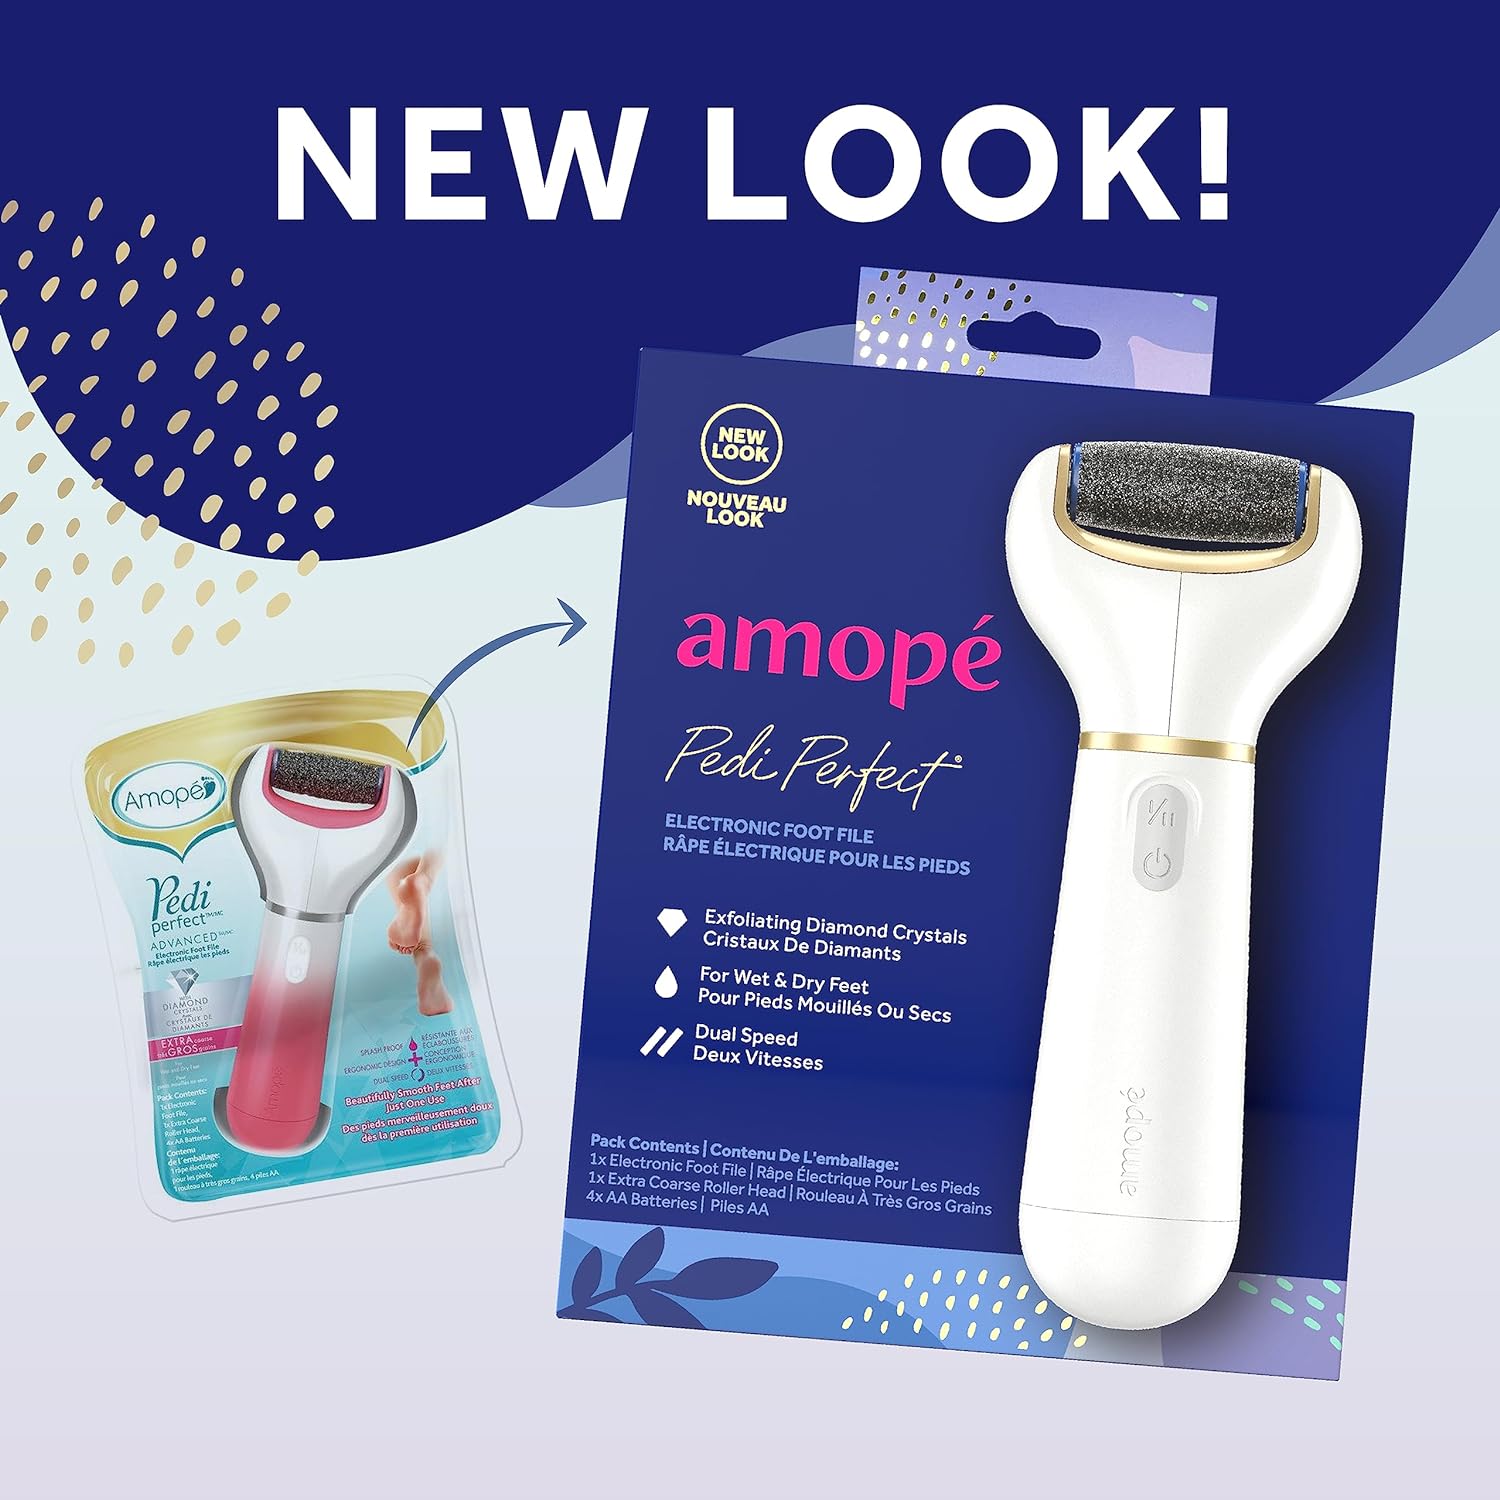 Amopé® Pedi Perfect® Electronic Foot File with Diamond Crystals, Removes Hard & Dead Skin, 1Ct - image 3 of 7